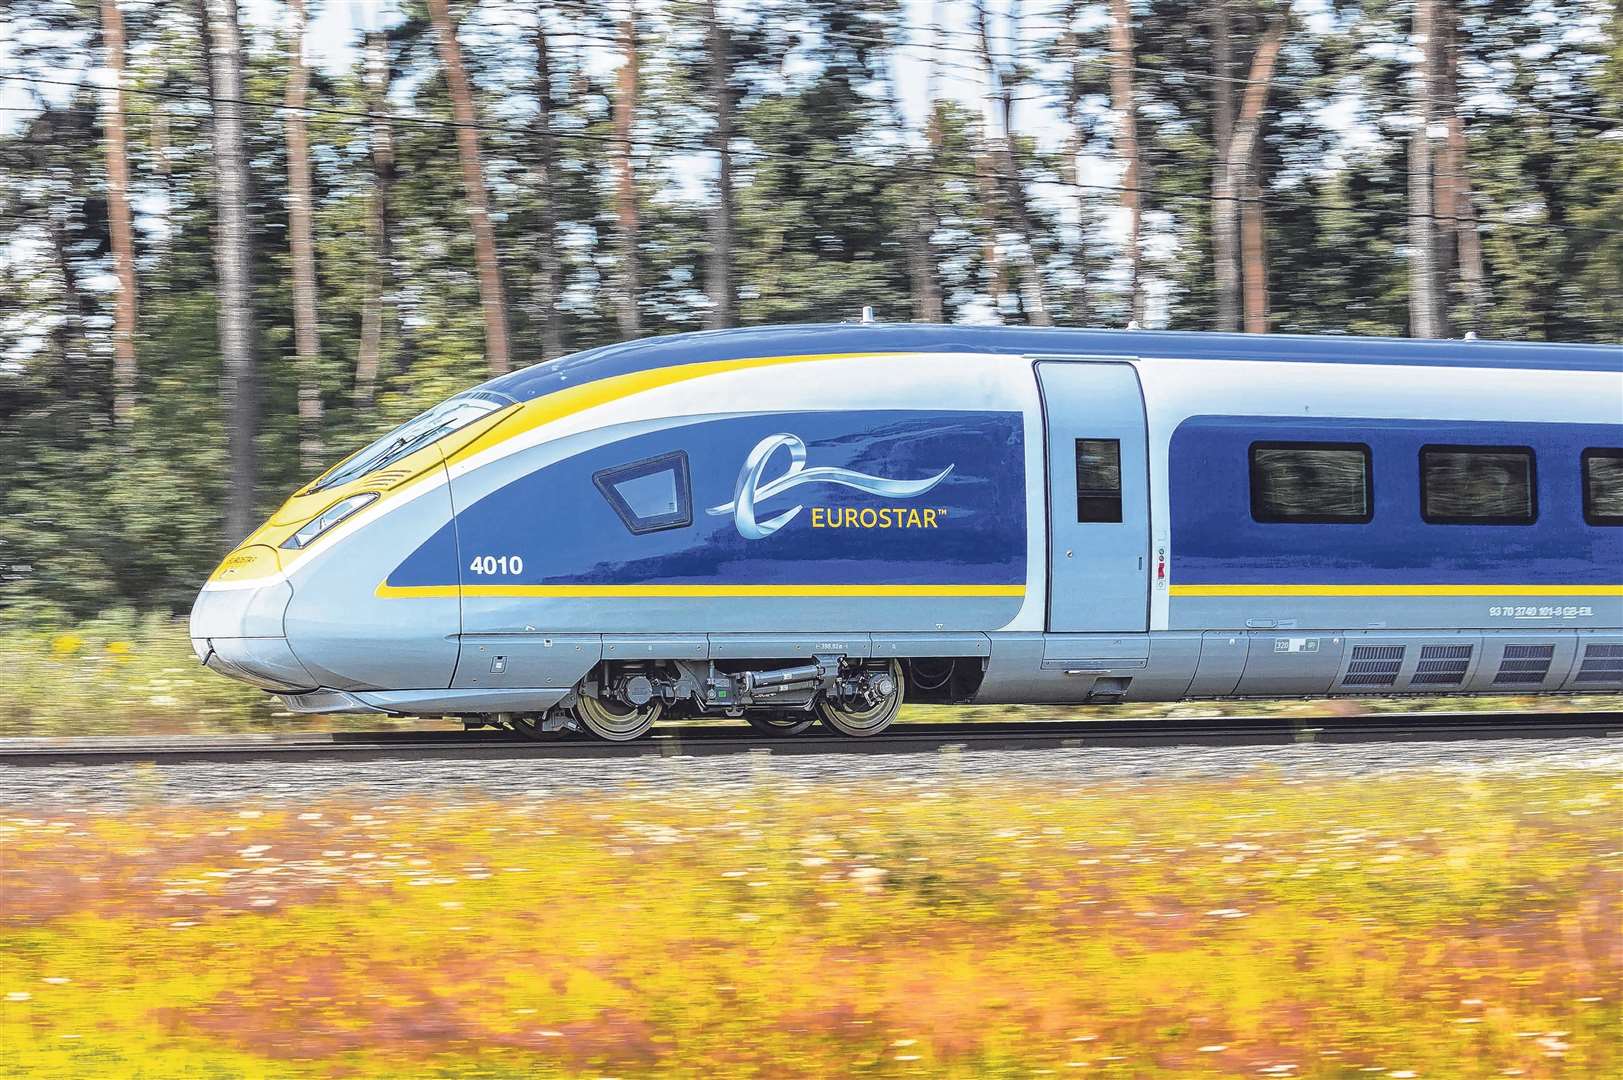 Eurostar has been told its advert "was likely to mislead"